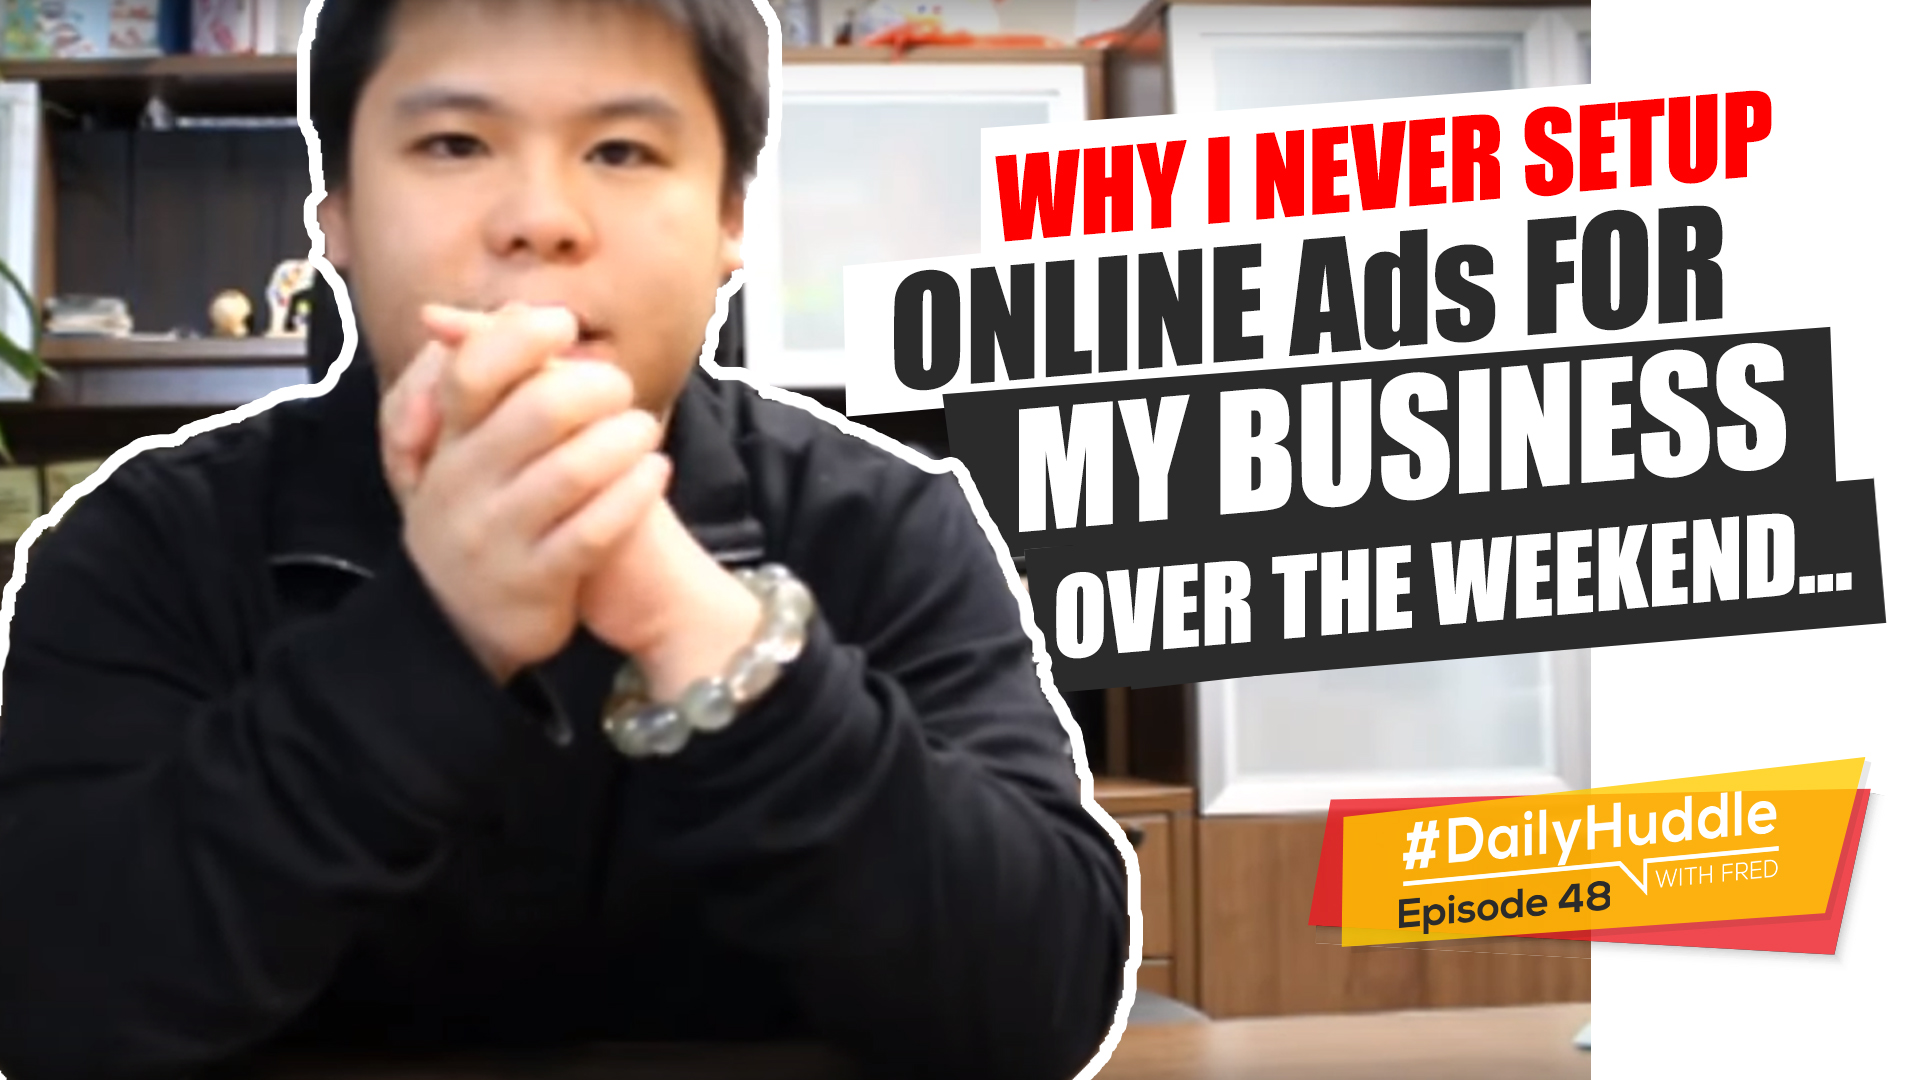 Daily Huddle - Ep 48 | Why I Never Setup Online Ads For My Business Over The Weekend...